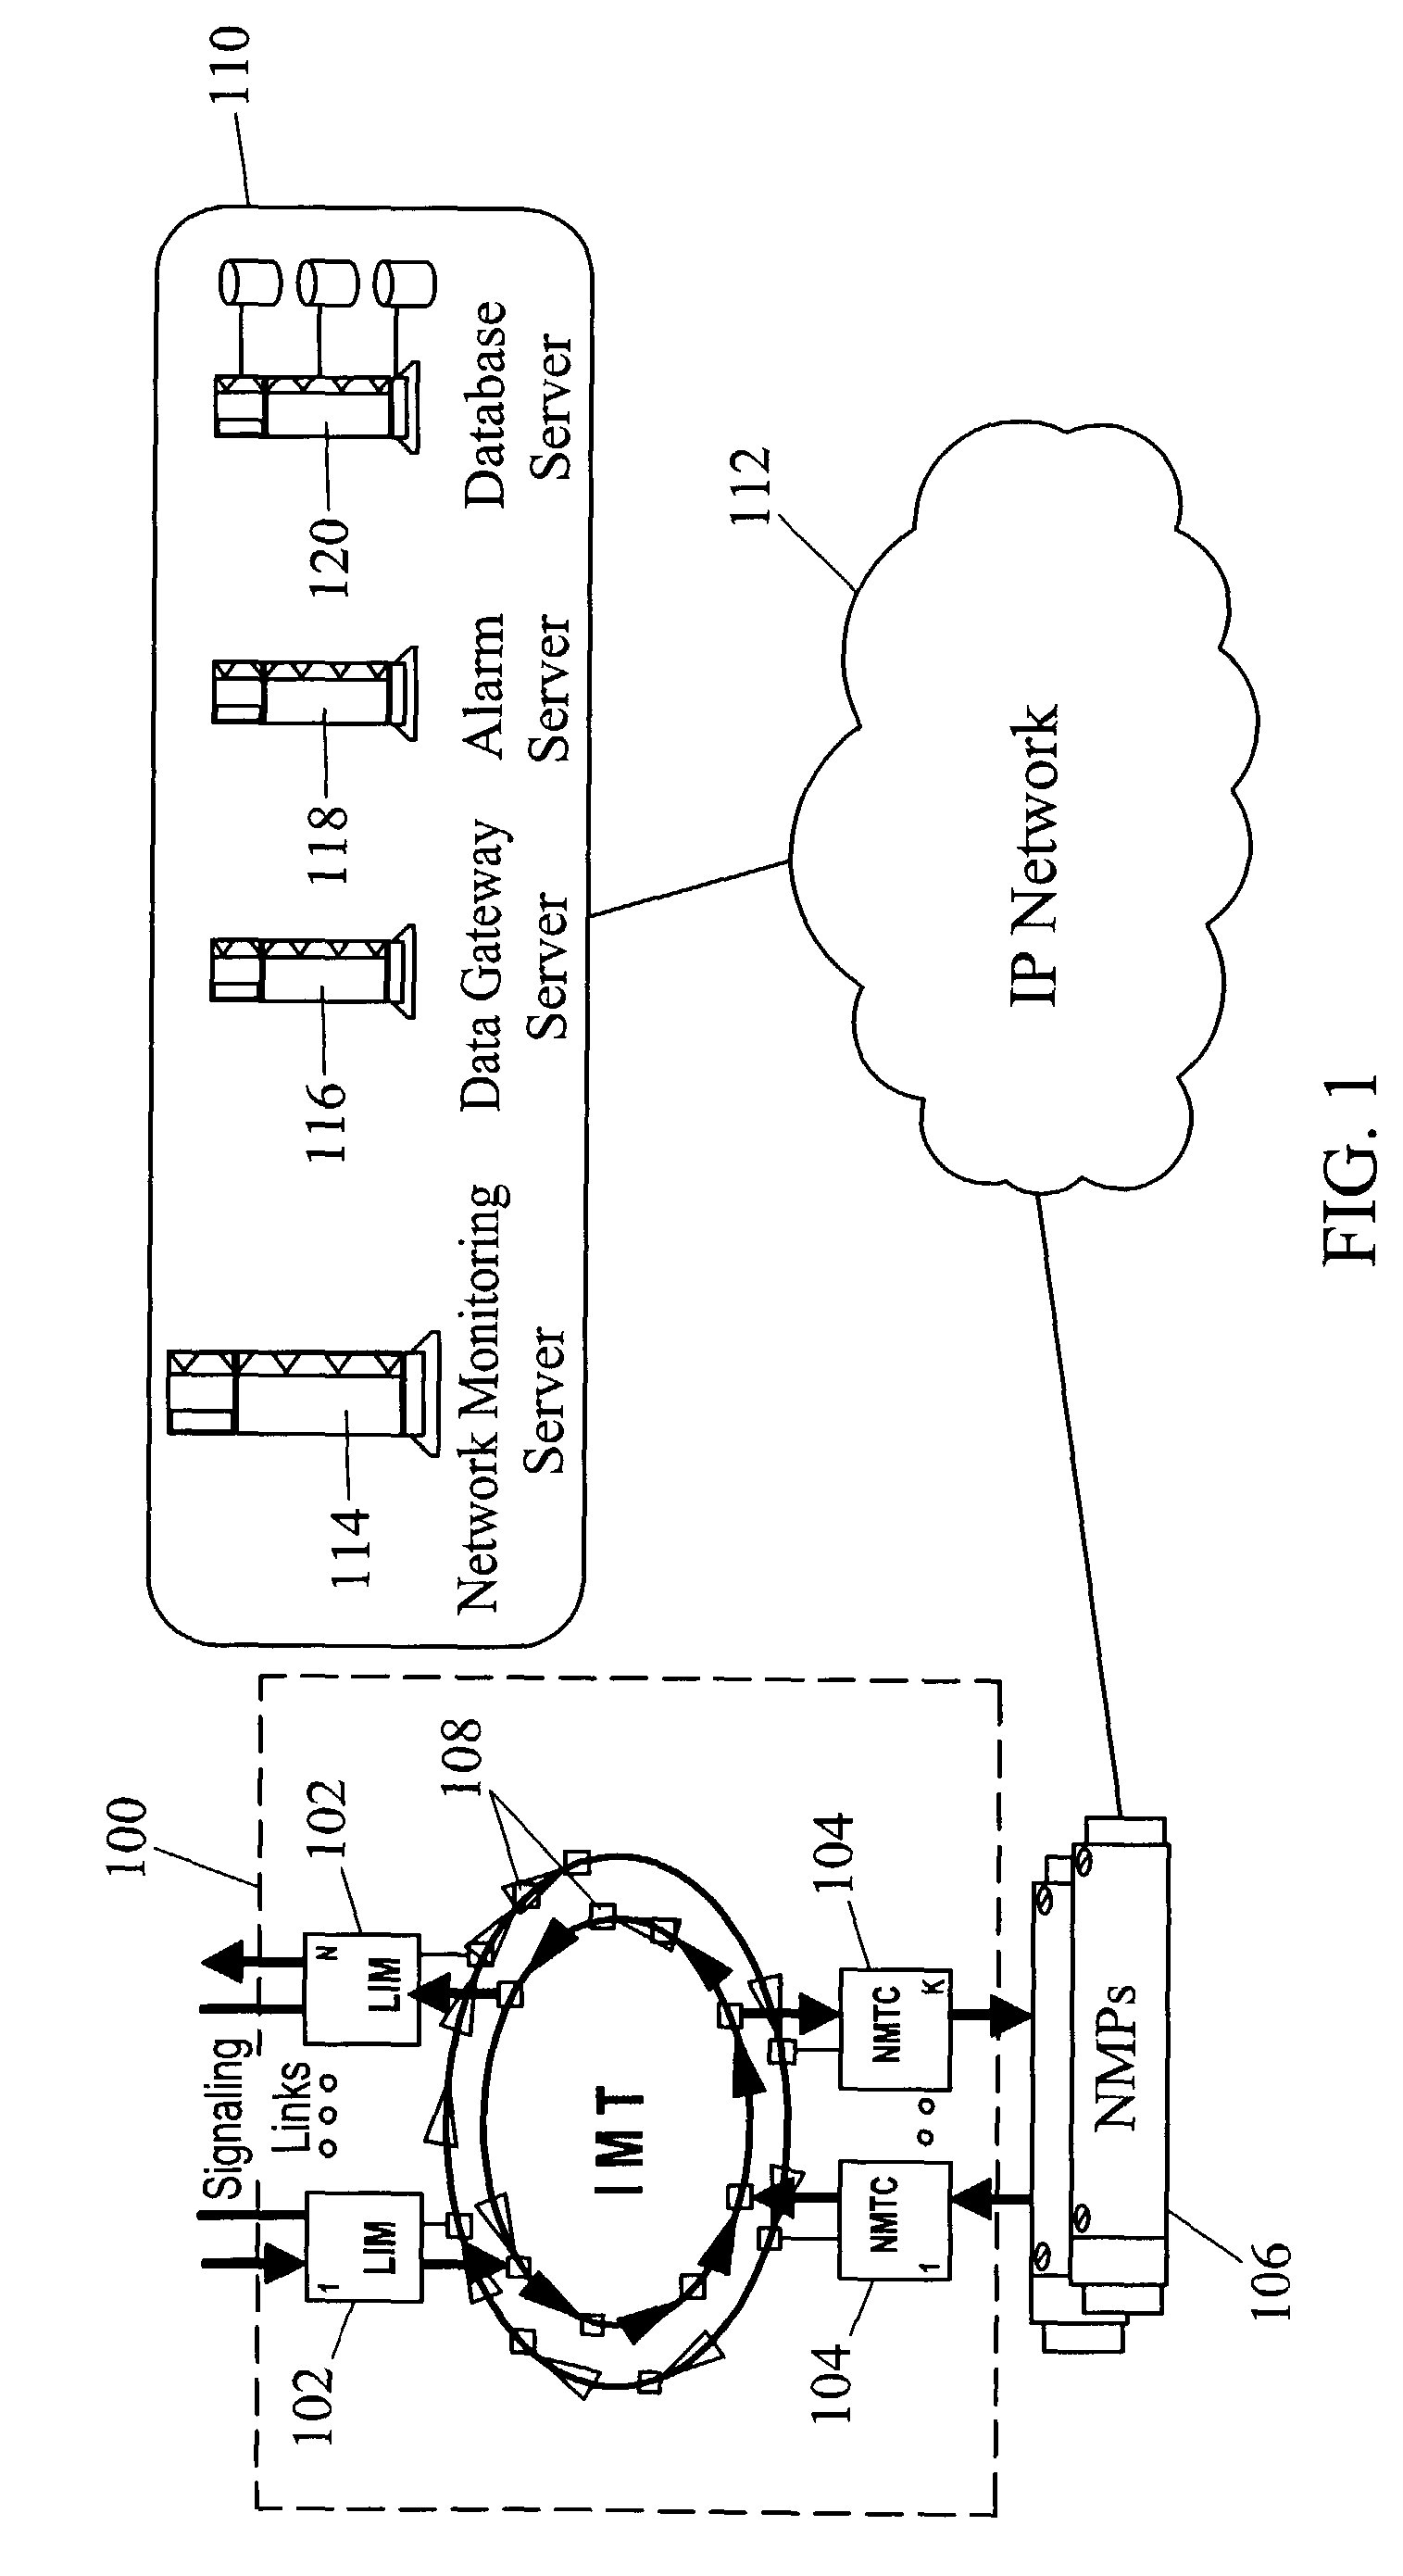 Methods and systems for automatically configuring network monitoring system